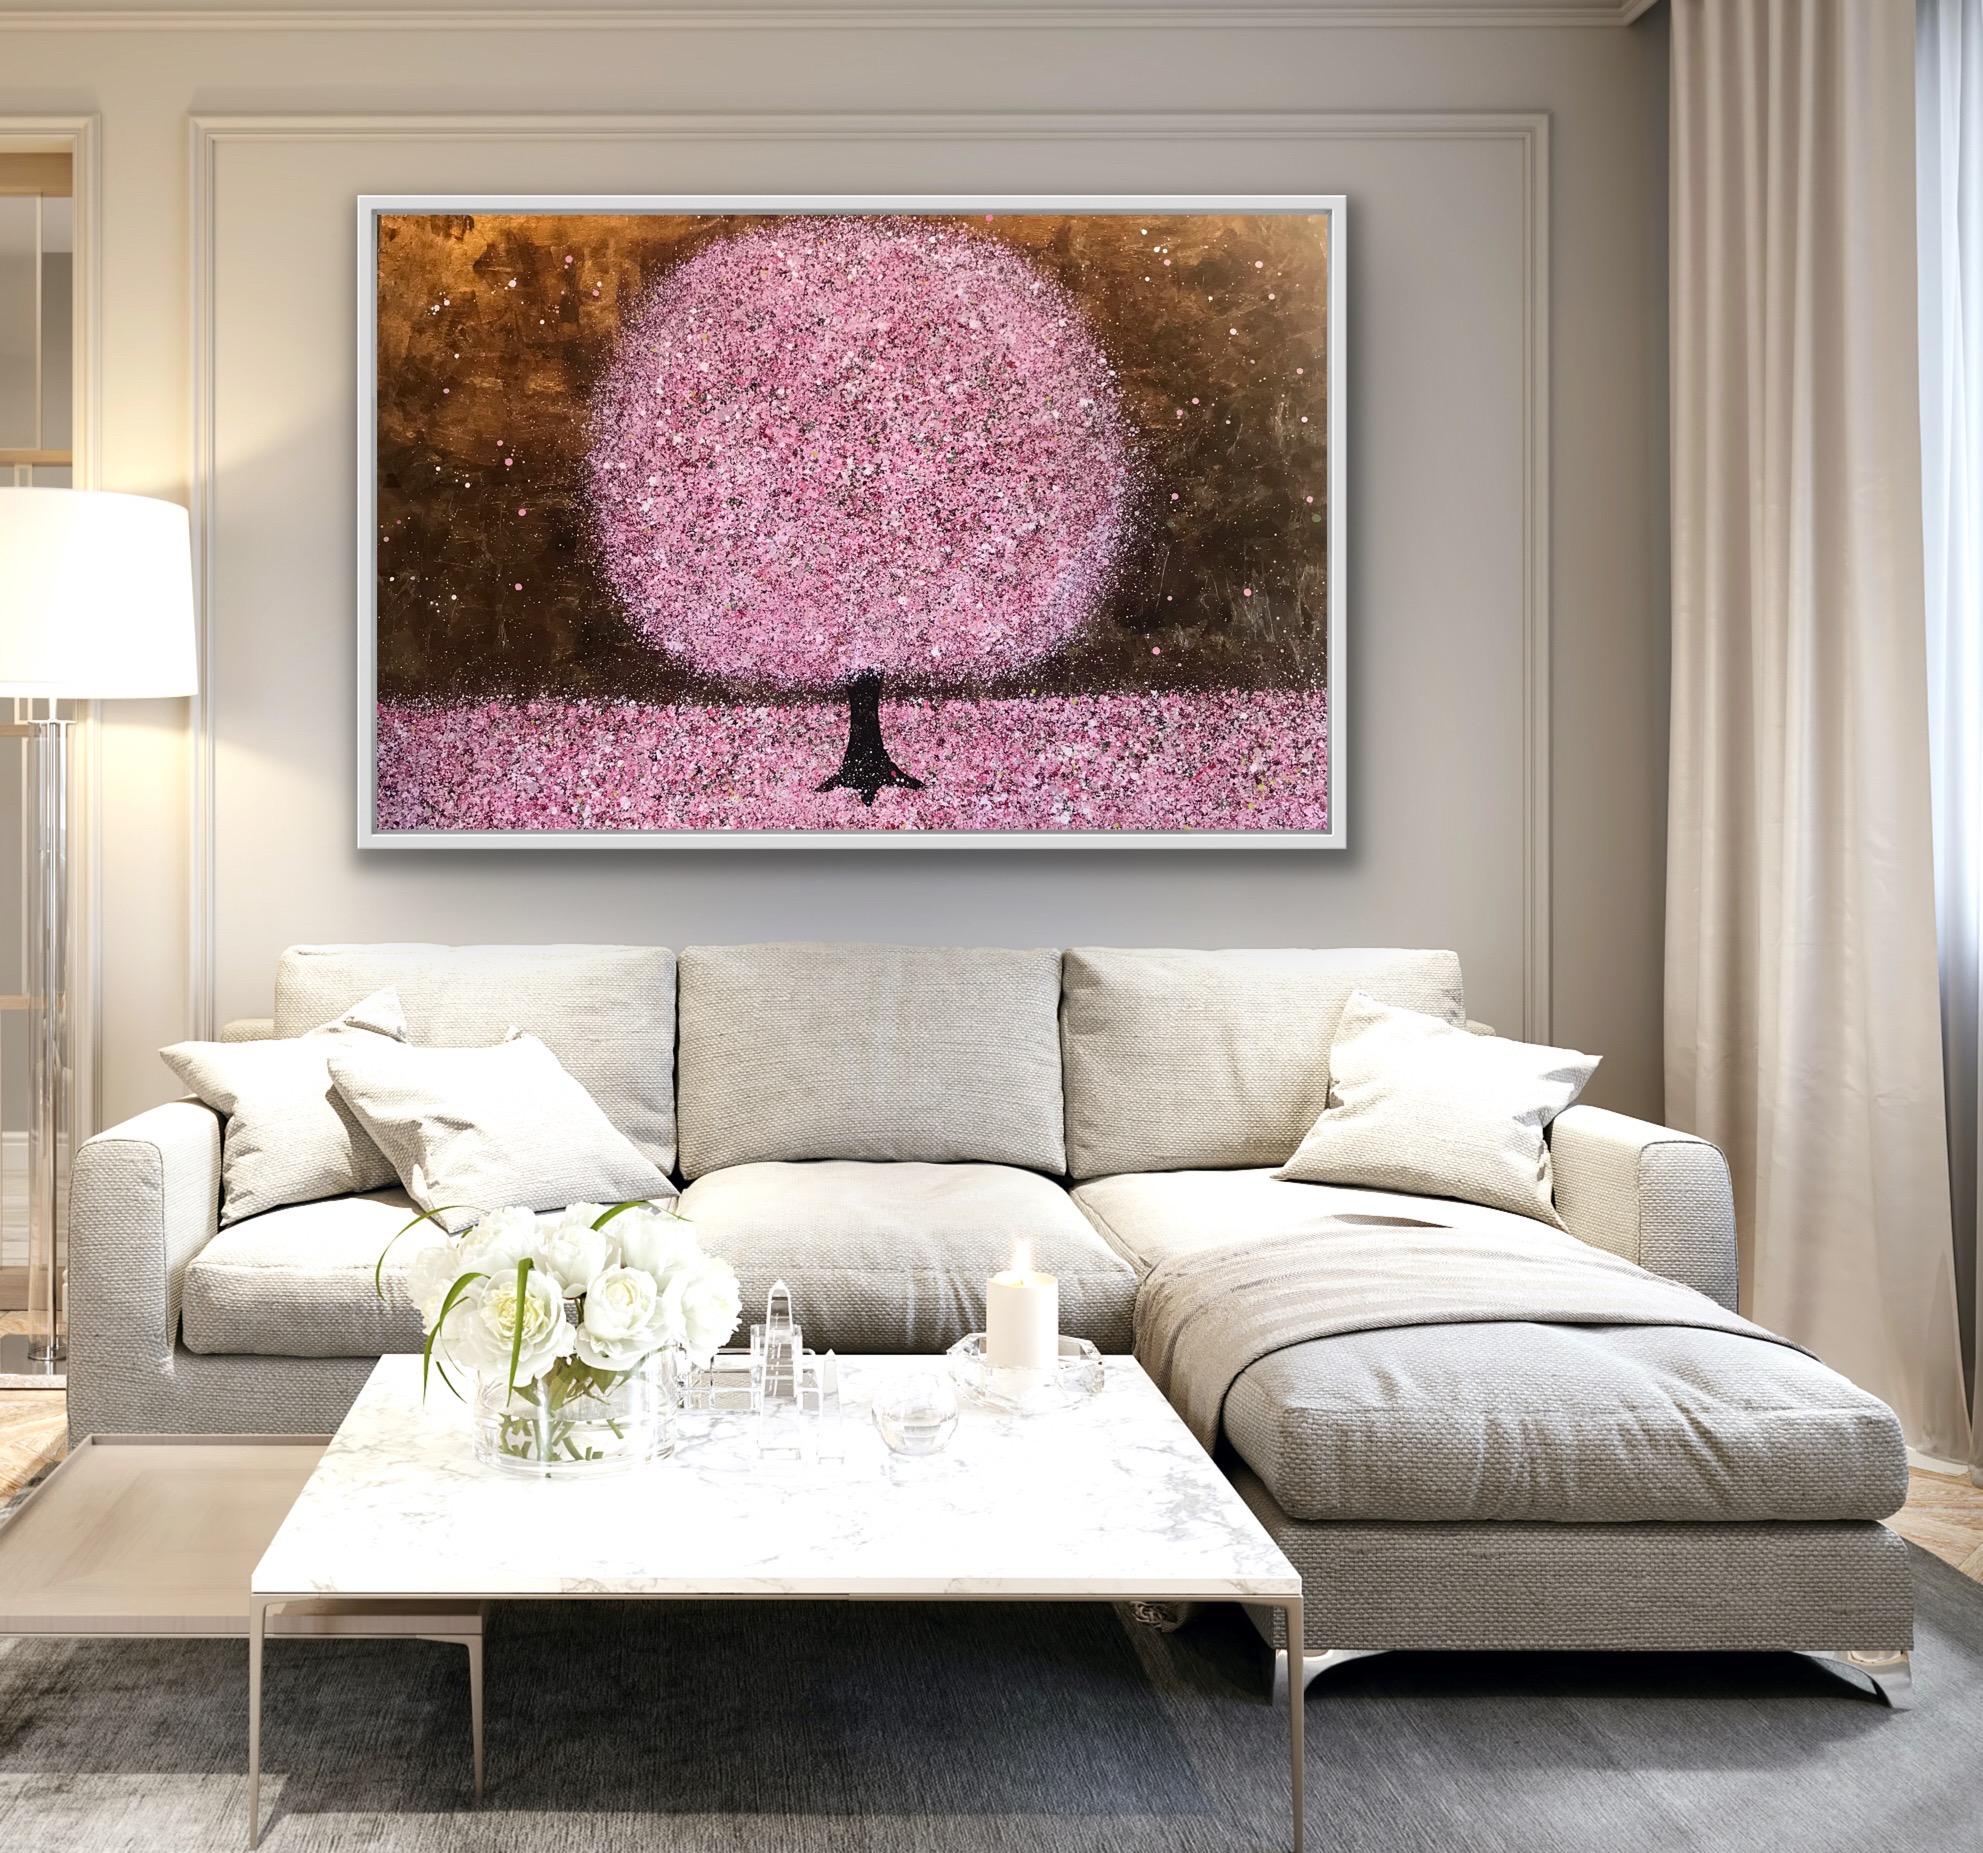 Blossoming in Spring, Bright Contemporary Tree Art, Pop Art Impressionist Style - Painting by Nicky Chubb